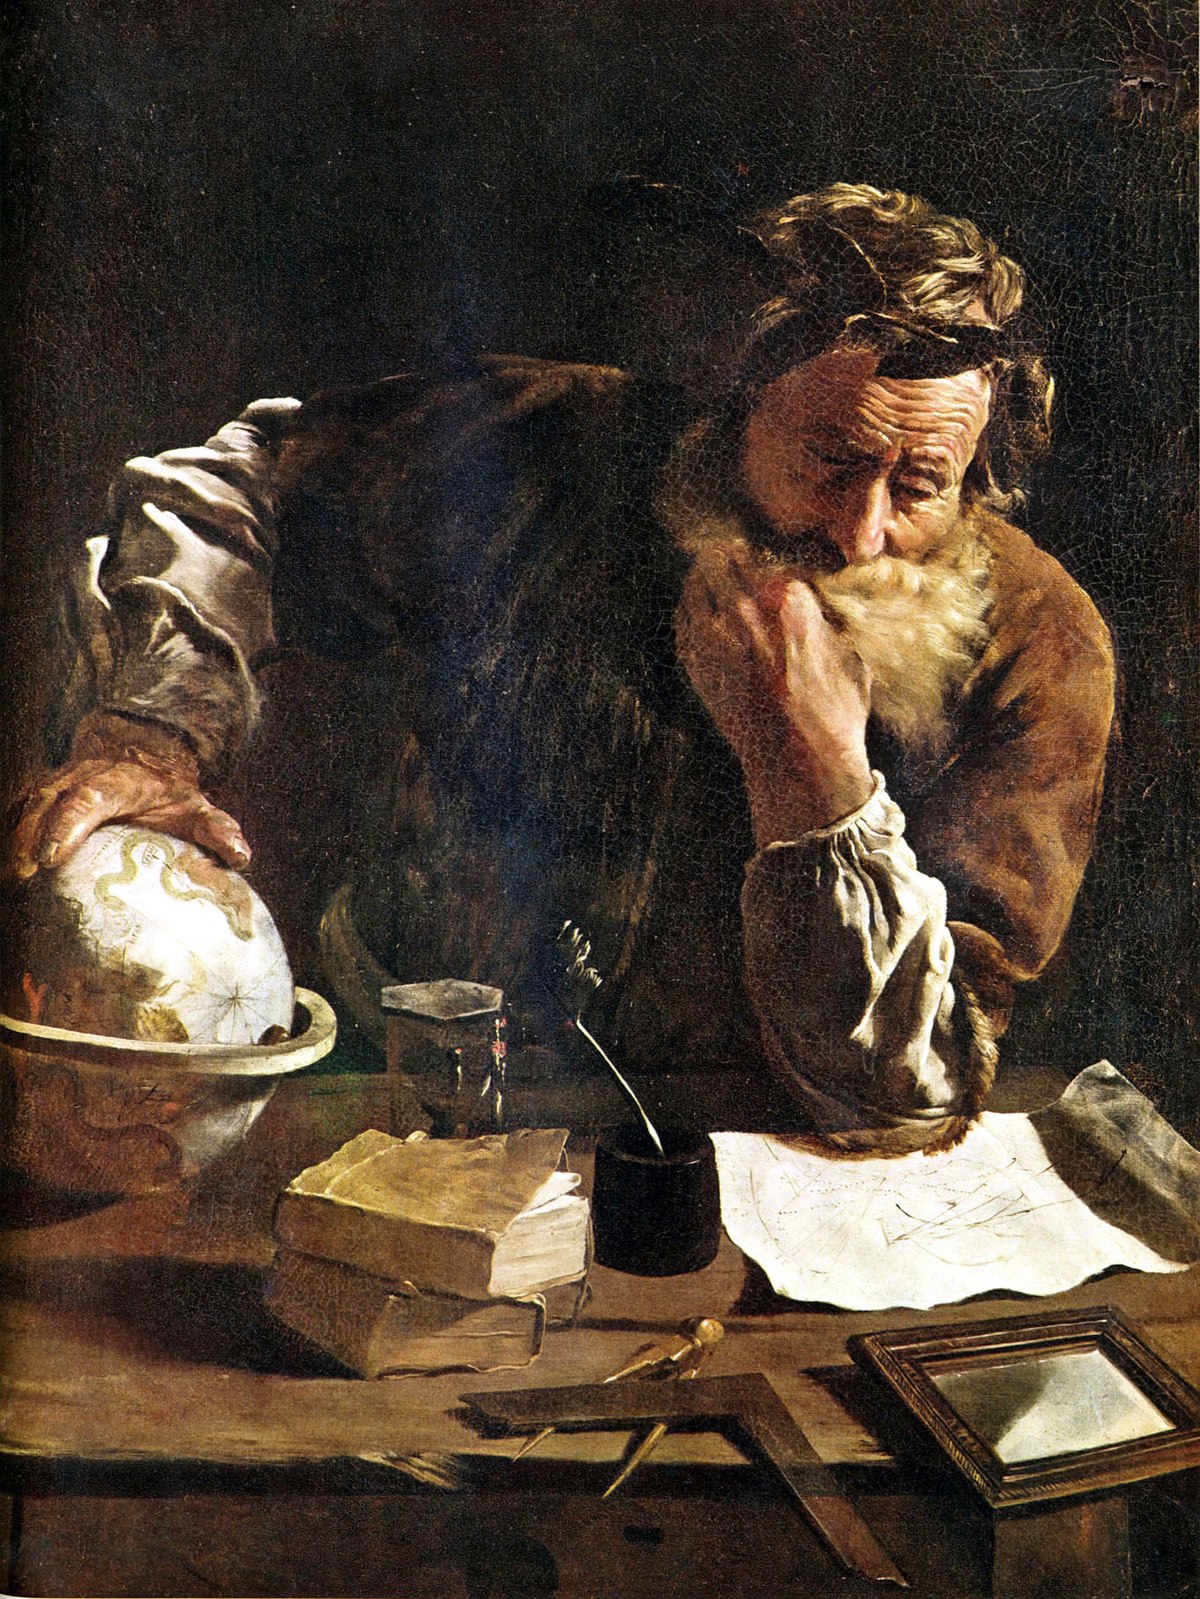 ArchimèdeDomenico Fetti, 1620, Musée Alte Meister, Dresde (Allemagne)